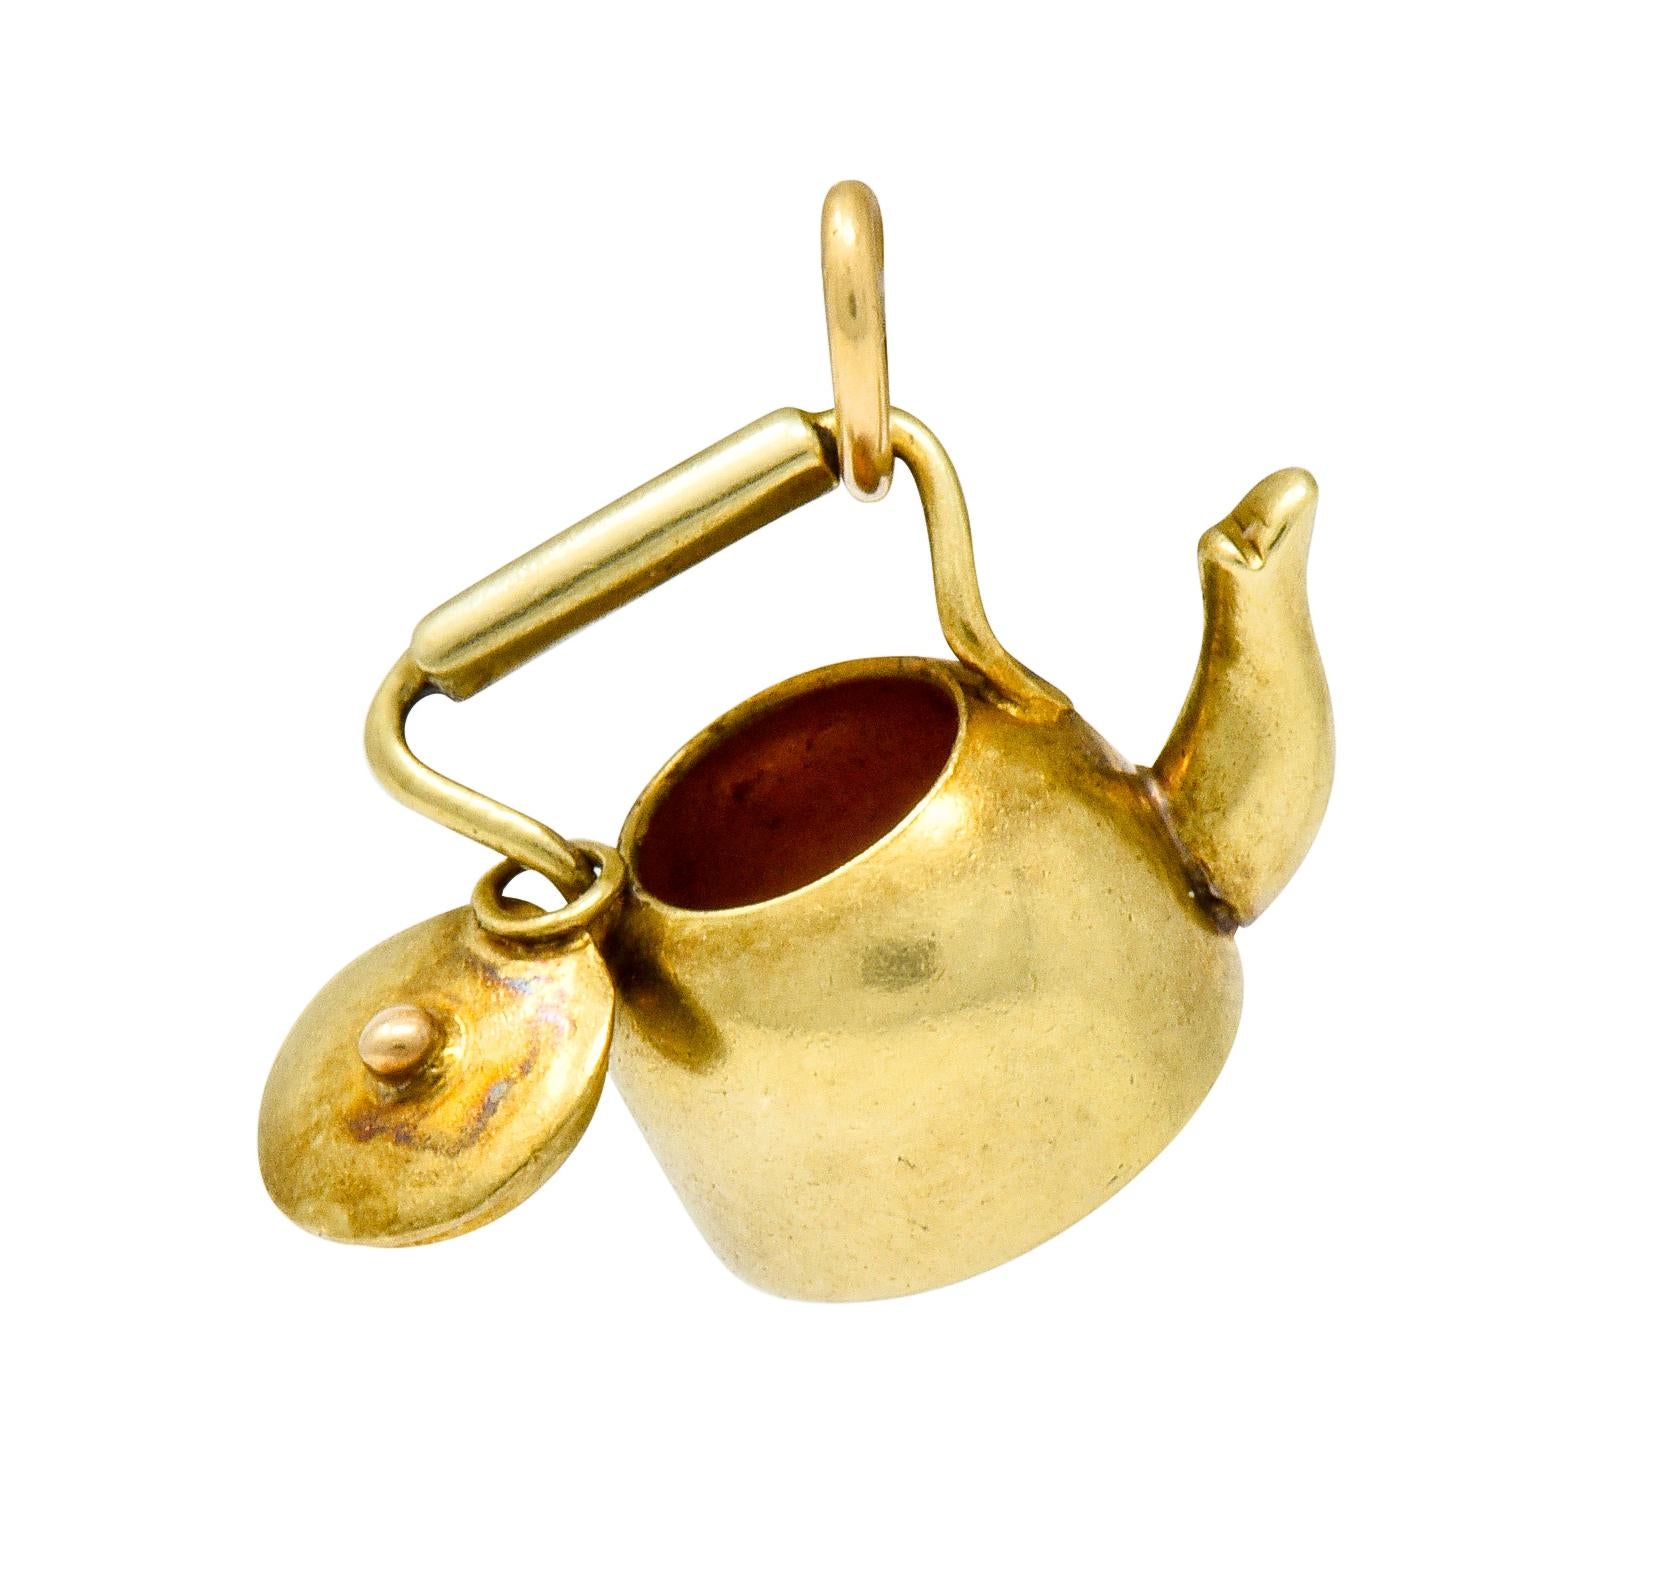 Whimsical charm designed as a tea kettle

With a curved spout and detailed bar style handle

Completed by jump ring bale

With maker's mark for Sloan & Co. and stamped 14 for 14 karat gold

Circa: 1905

Measures: 1/2 x 3/8 inch

Total weight: 1.4